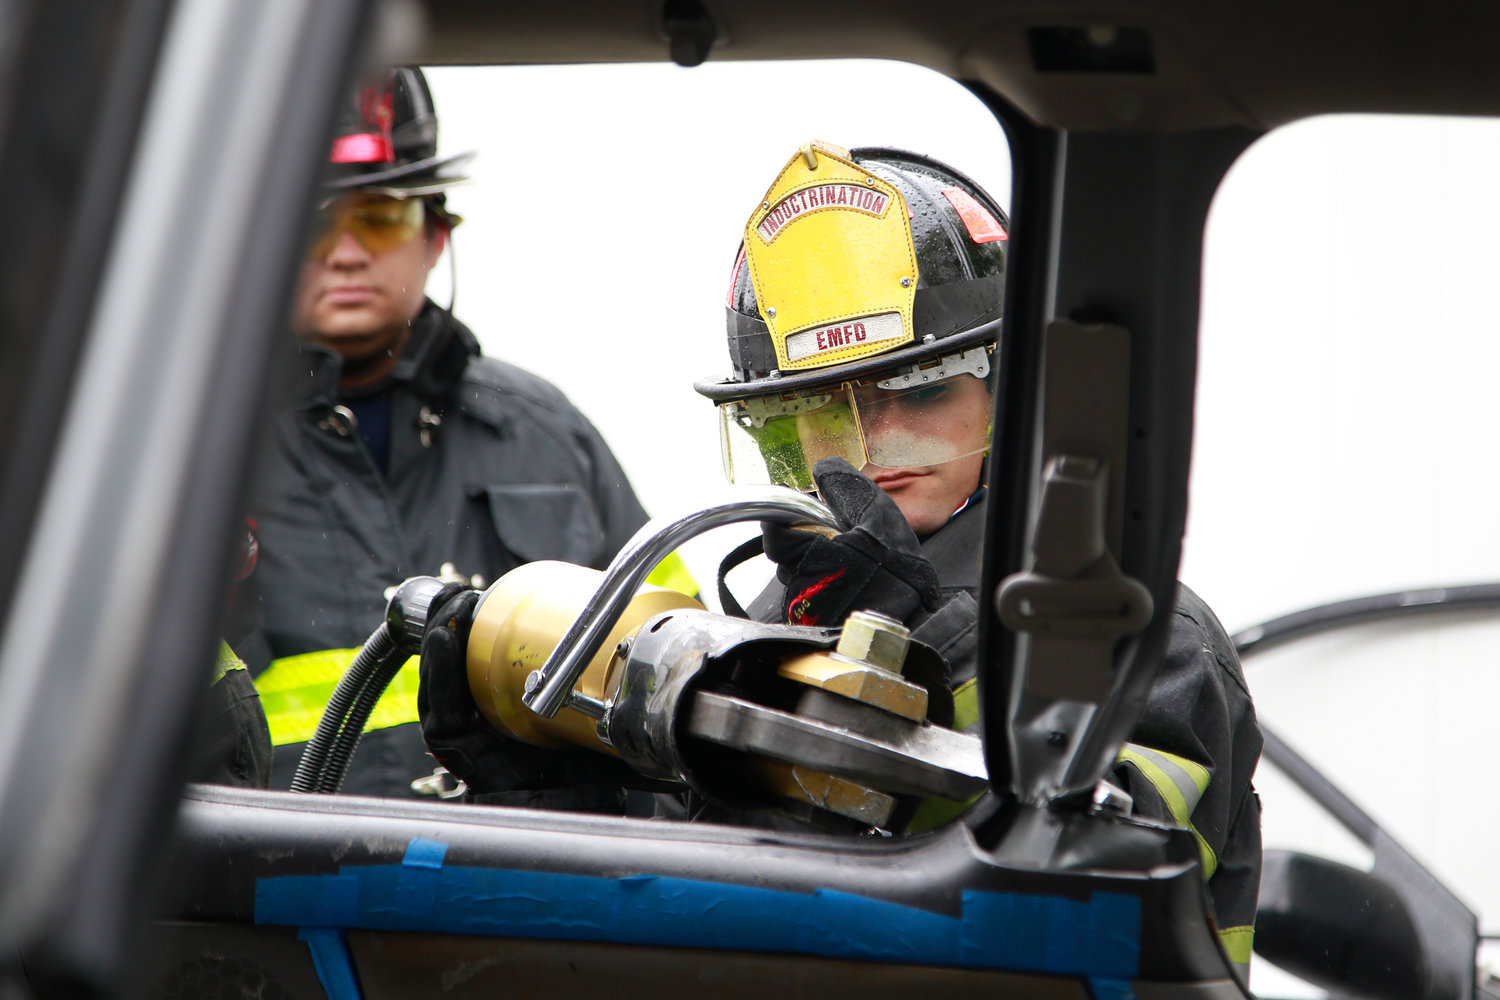 Firefighter Ionut Koshar, of Ladder 1, cut through an SUV’s window frame in one of the demonstrations.